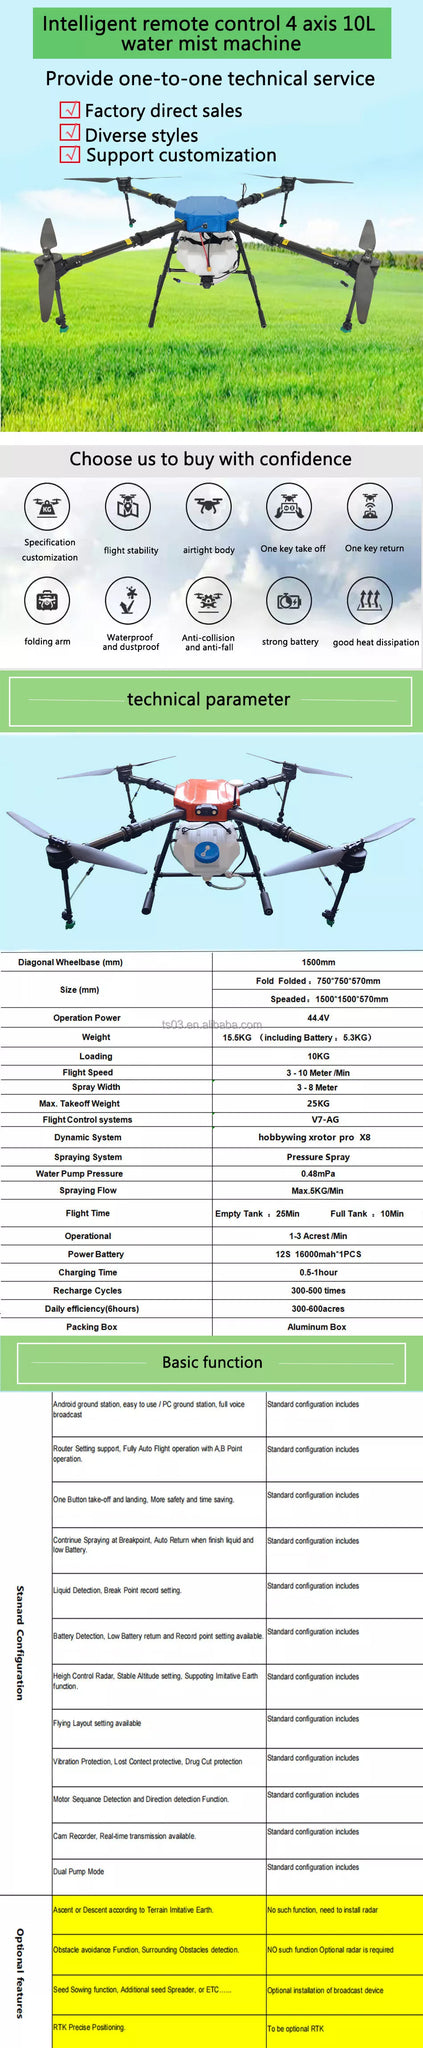 FNY-10 10L Agriculture Drone, edmunds is a leading global manufacturer of water mist machines .